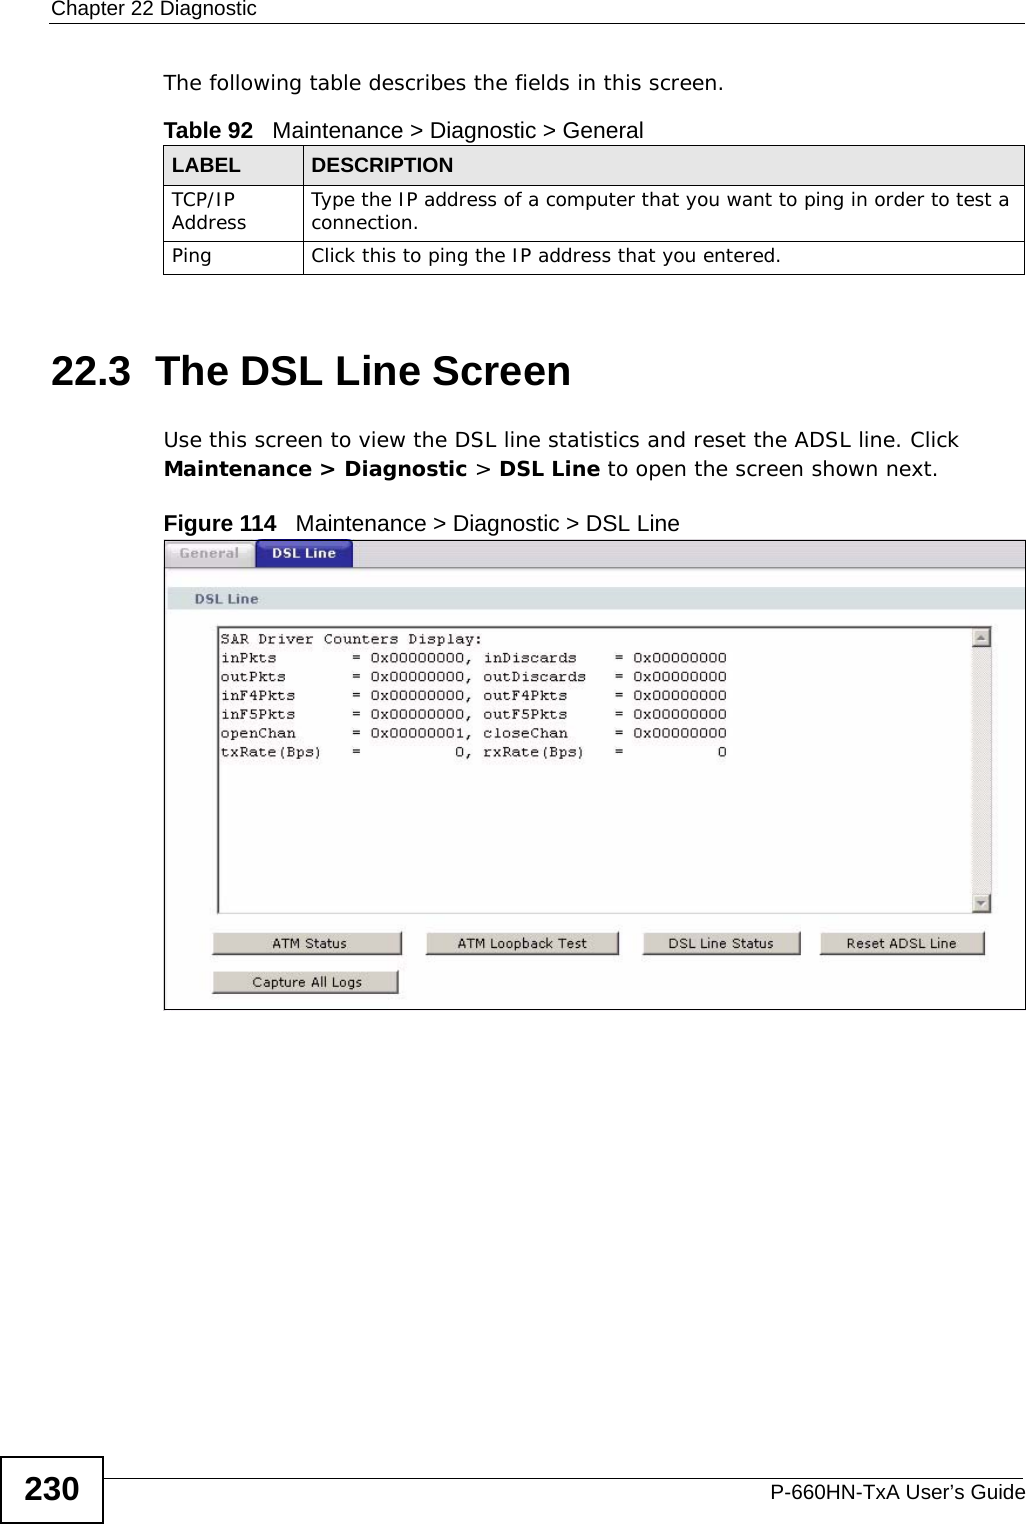 Chapter 22 DiagnosticP-660HN-TxA User’s Guide230The following table describes the fields in this screen. 22.3  The DSL Line Screen Use this screen to view the DSL line statistics and reset the ADSL line. Click Maintenance &gt; Diagnostic &gt; DSL Line to open the screen shown next.Figure 114   Maintenance &gt; Diagnostic &gt; DSL LineTable 92   Maintenance &gt; Diagnostic &gt; GeneralLABEL DESCRIPTIONTCP/IP Address Type the IP address of a computer that you want to ping in order to test a connection.Ping Click this to ping the IP address that you entered.